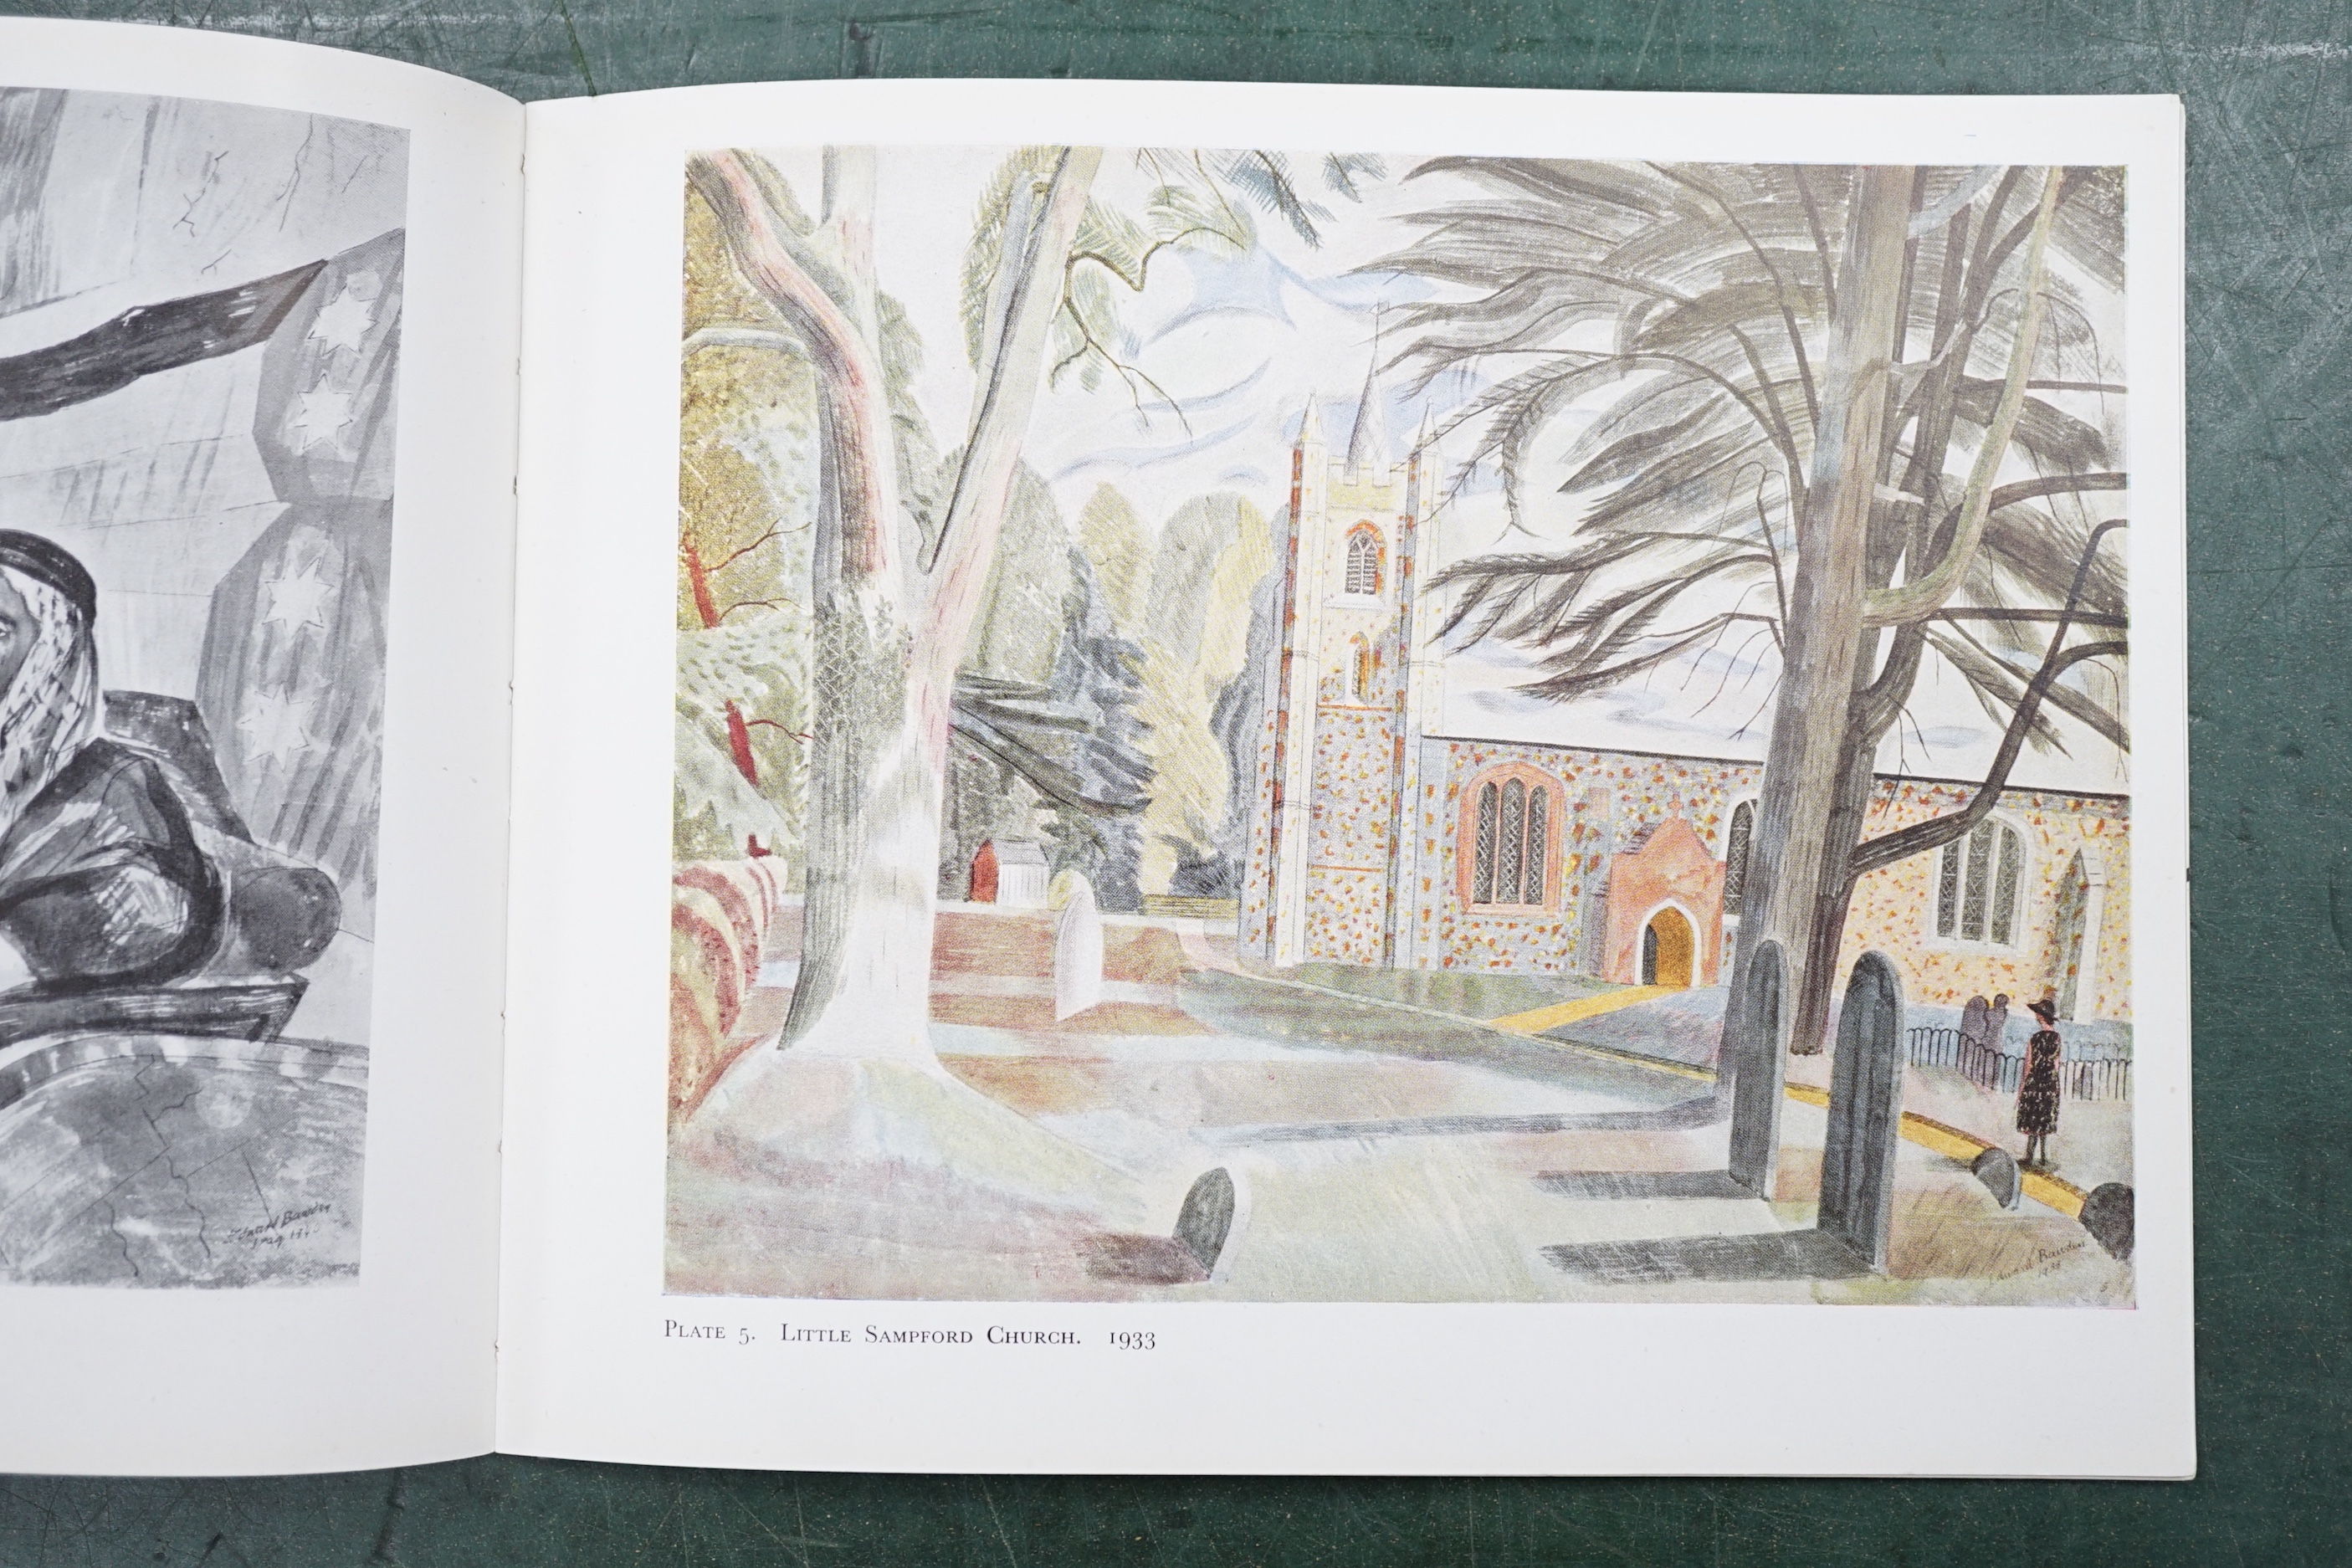 Bawden, Edward - 19 works, about or illustrated by:- Malory, Sir Thomas - Malory’s Chronicles of King Arthur, 3 vols, Folio Society, 1982, in slip case; Herodotus, translated by Harry Carter, one of 1500 signed by the il